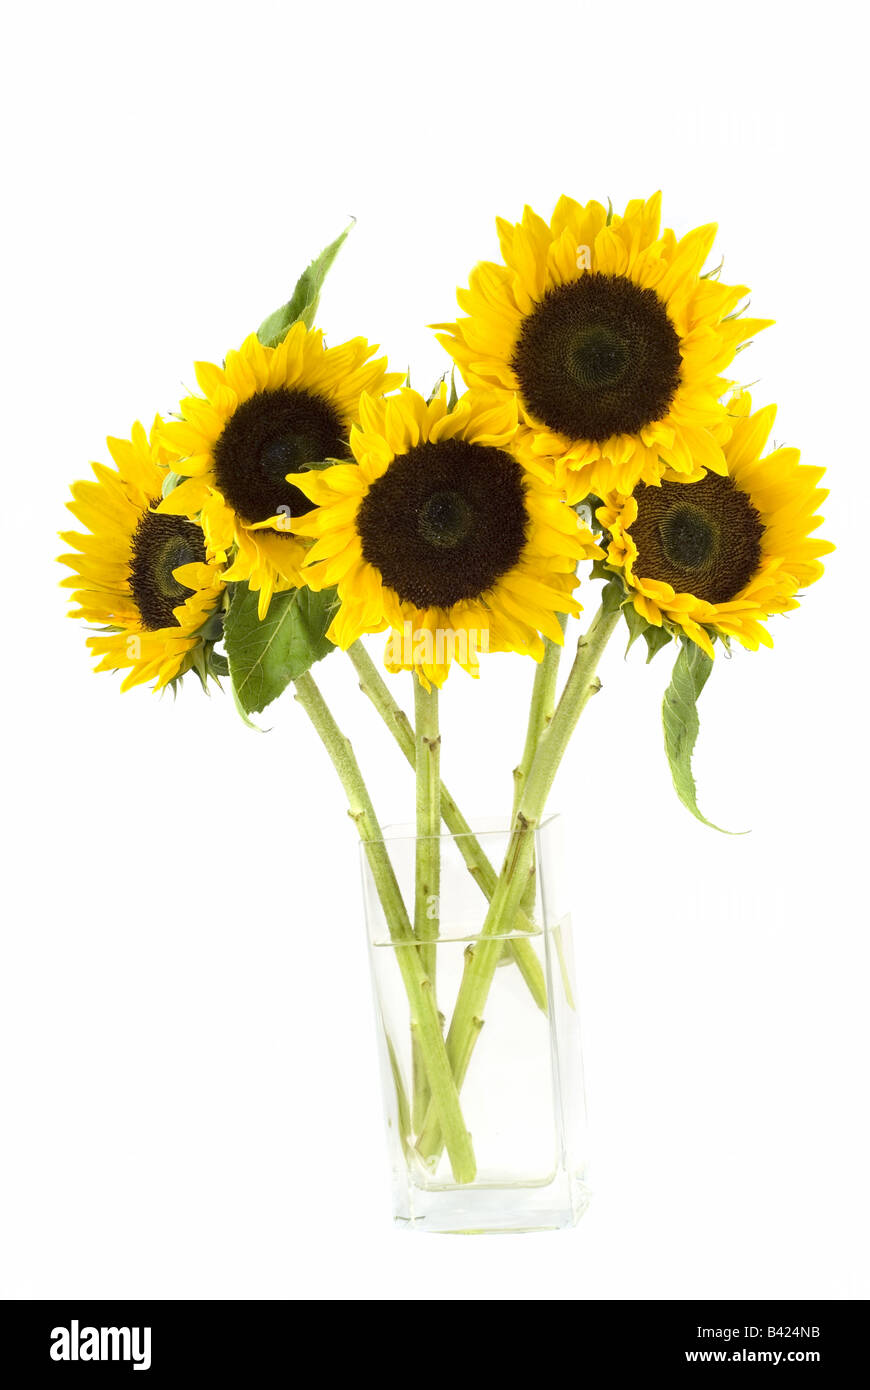 Bunch of sunflowers in a glass vase isolated on white Stock Photo